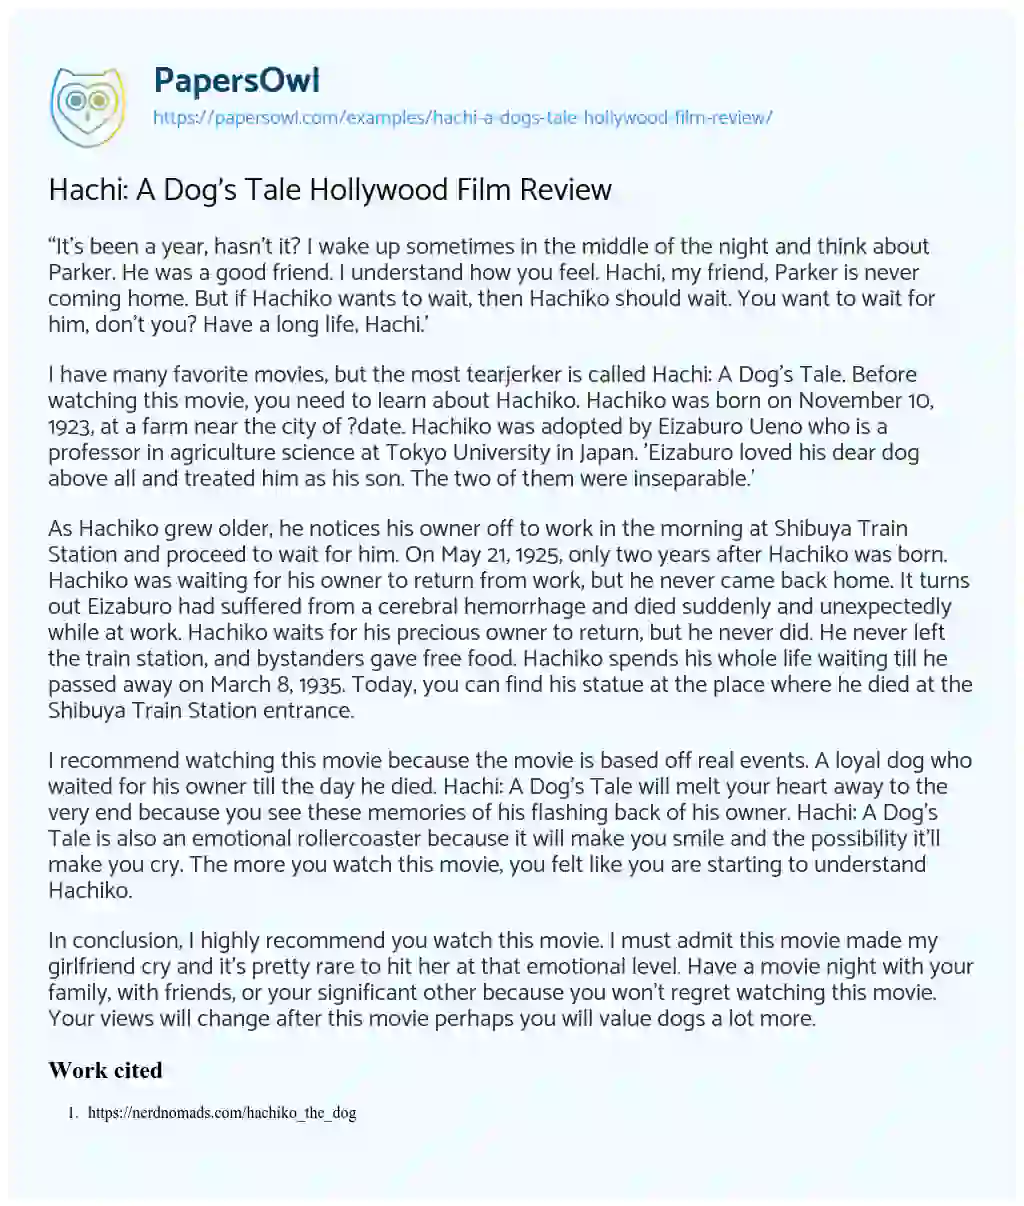 Hachi: a Dog’s Tale Hollywood Film Review essay